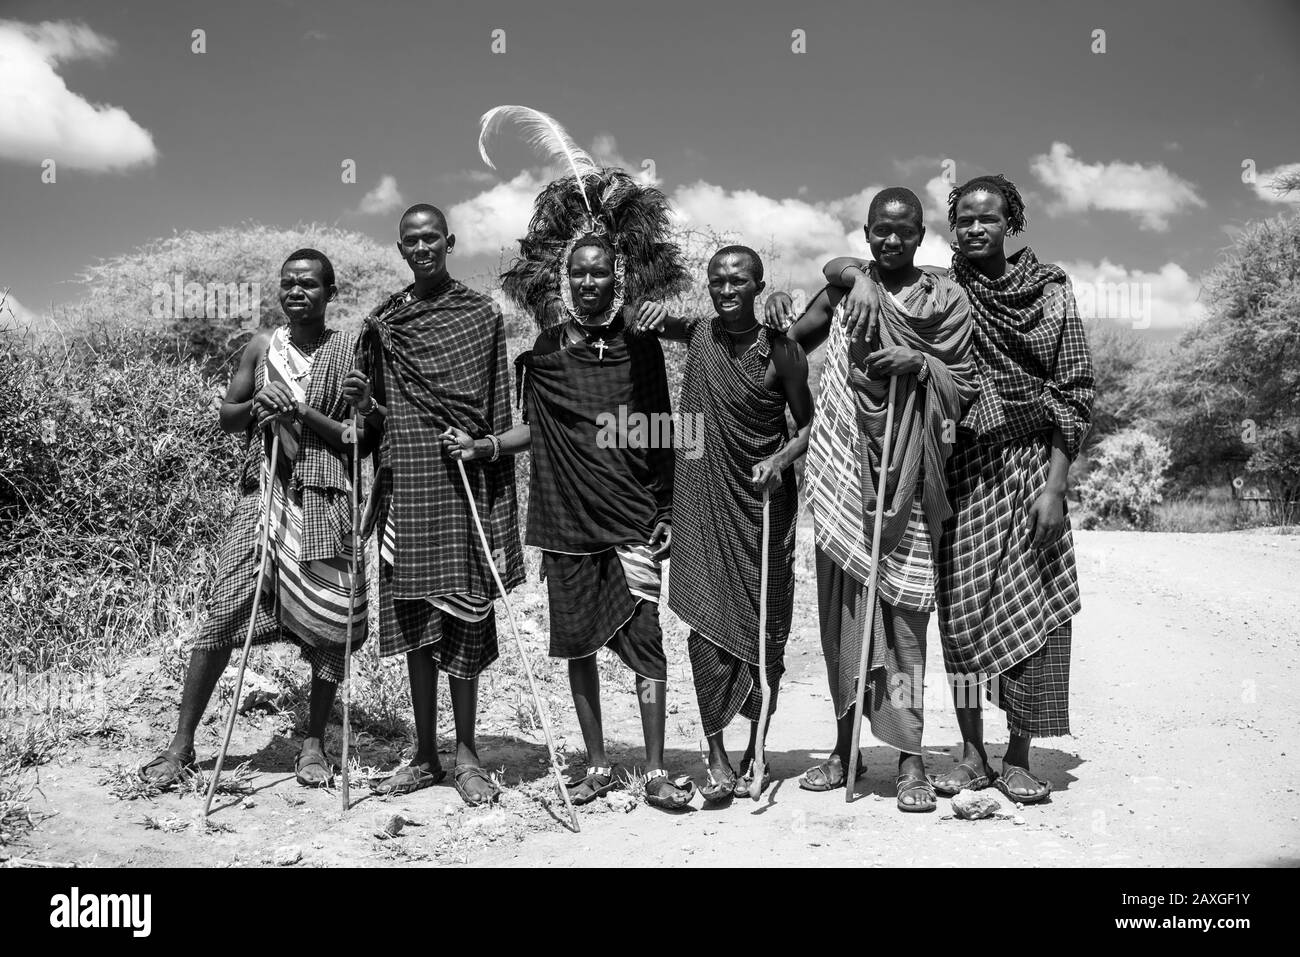 Group of handsome local Maasai in traditional dress. Loved the drama of the black and white version. Stock Photo